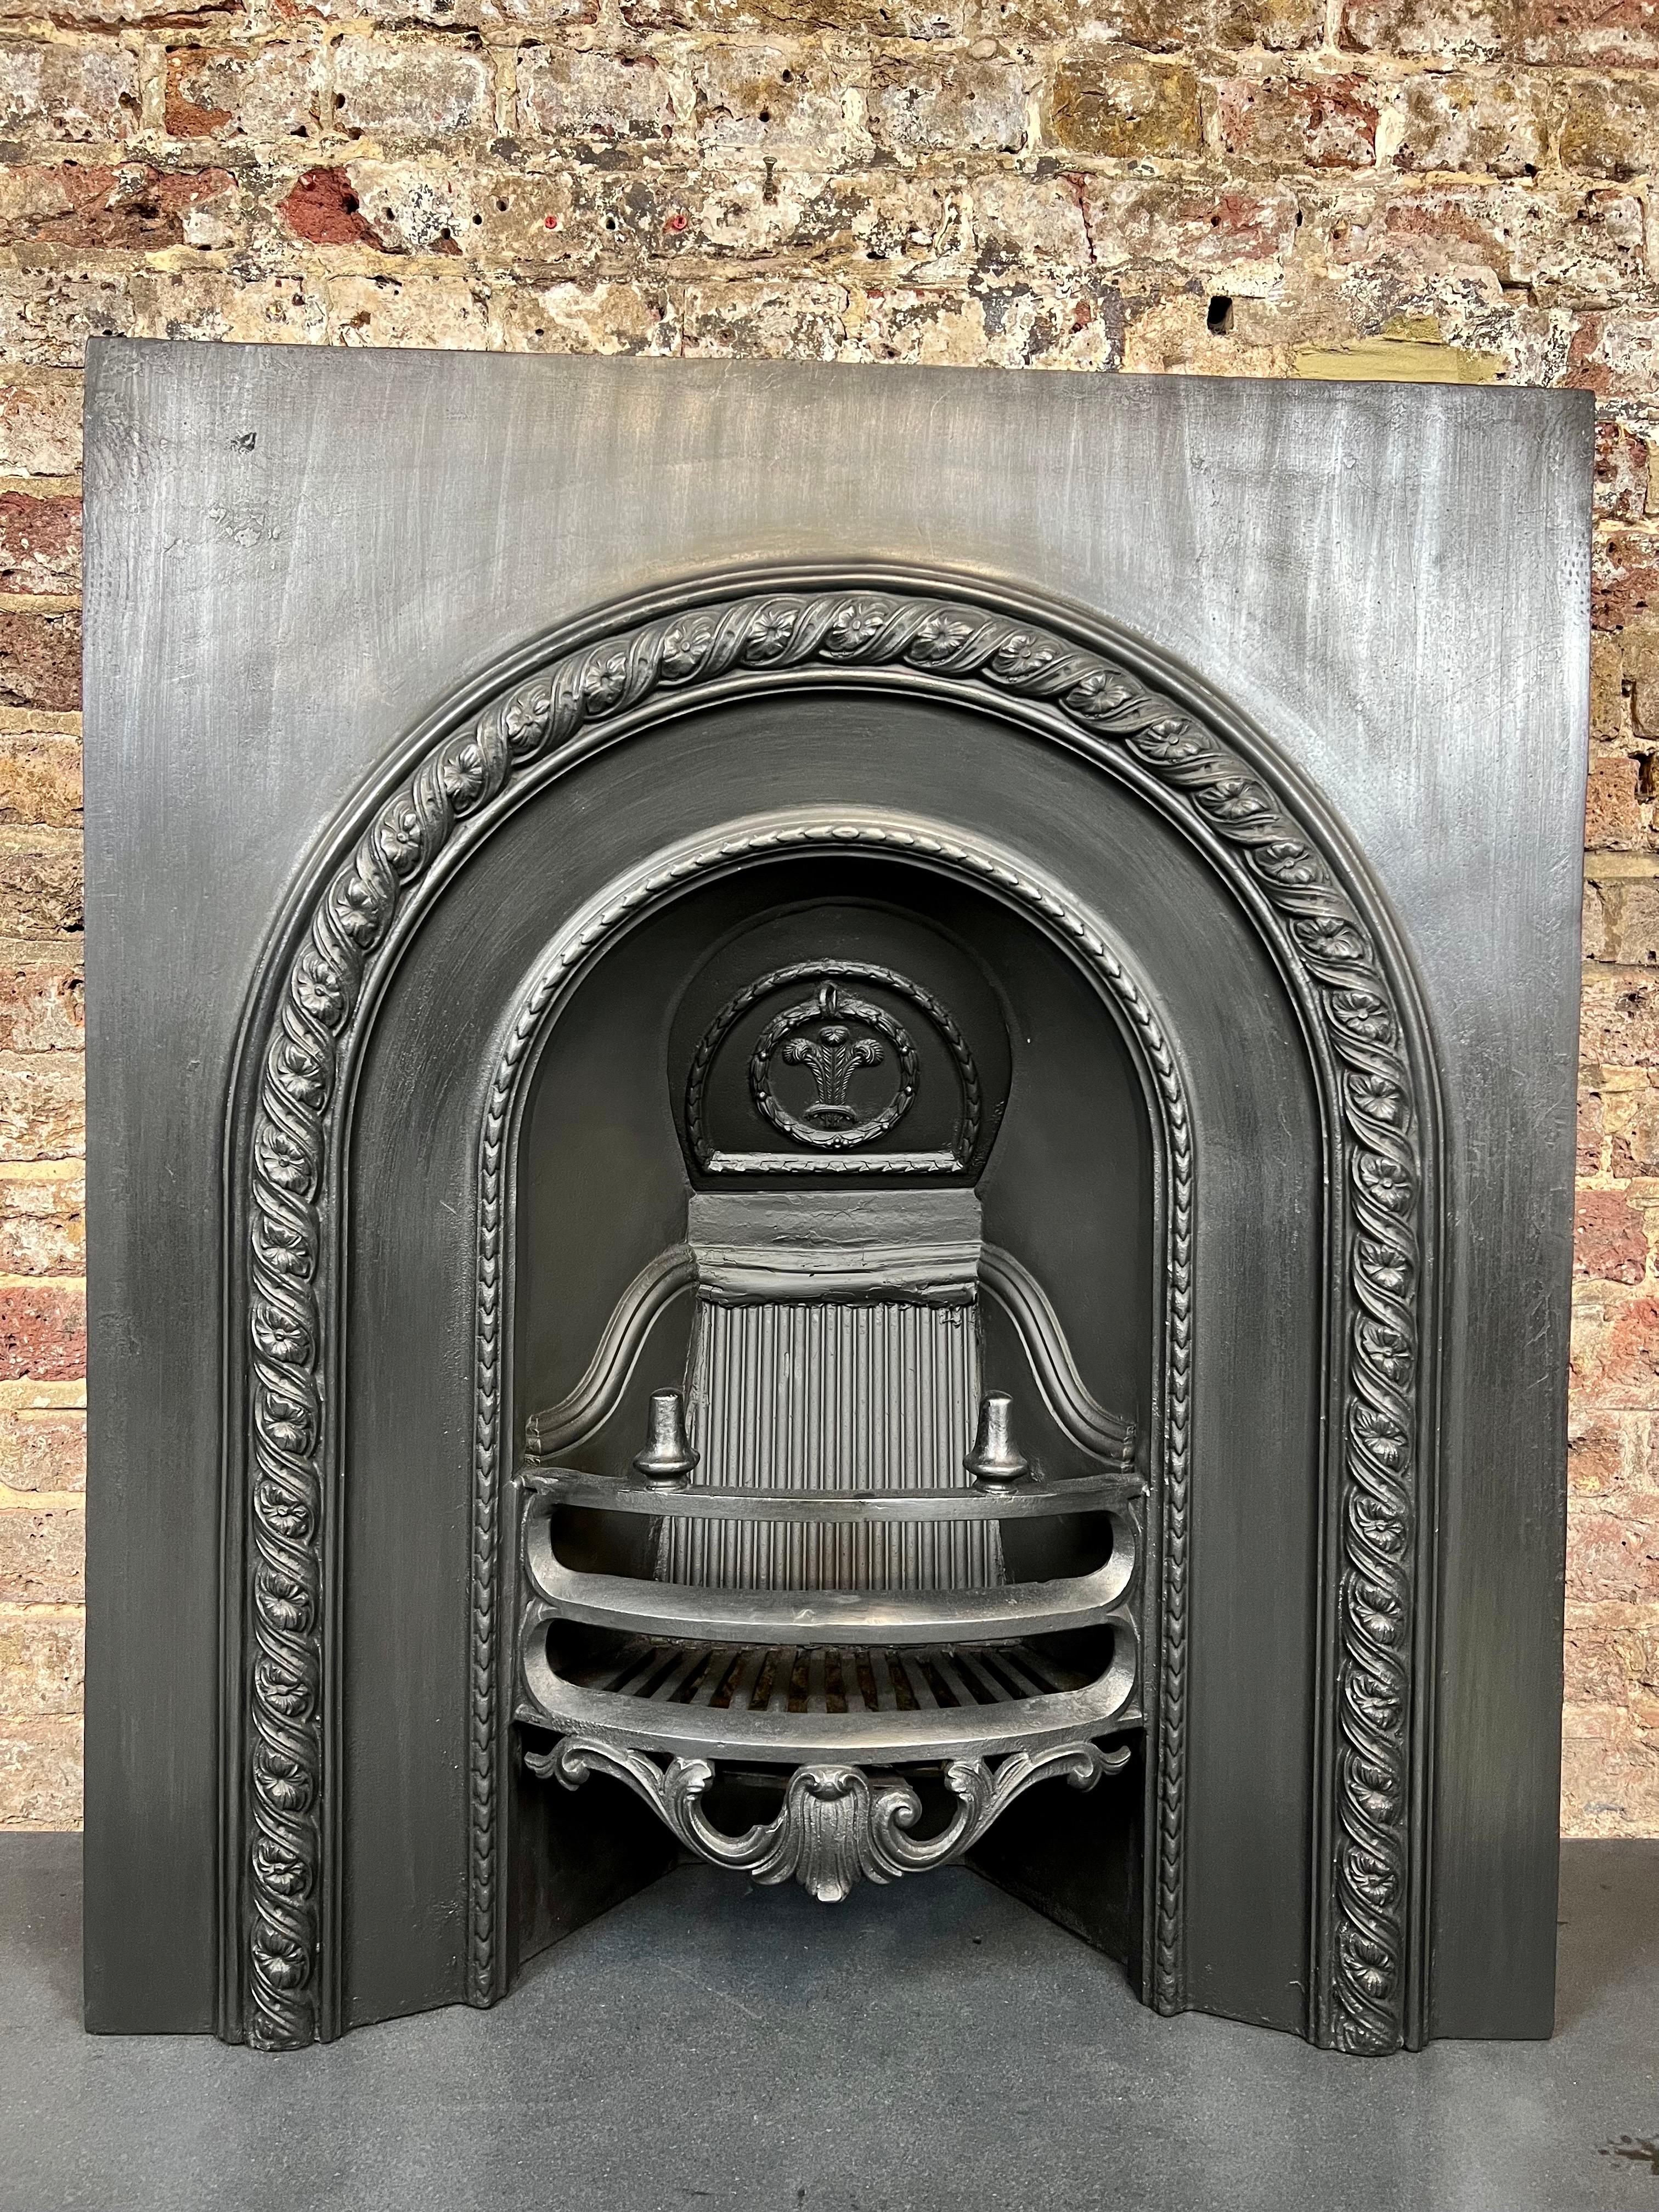 19th Century tiled cast iron fireplace insert.
Original victorian fireplace with Fleur-De- Lis Pattern on back, decorative front bars with two prominent spikes and Classice 
Arch rope design in traditional blackened.

Dimensions:
Width 32